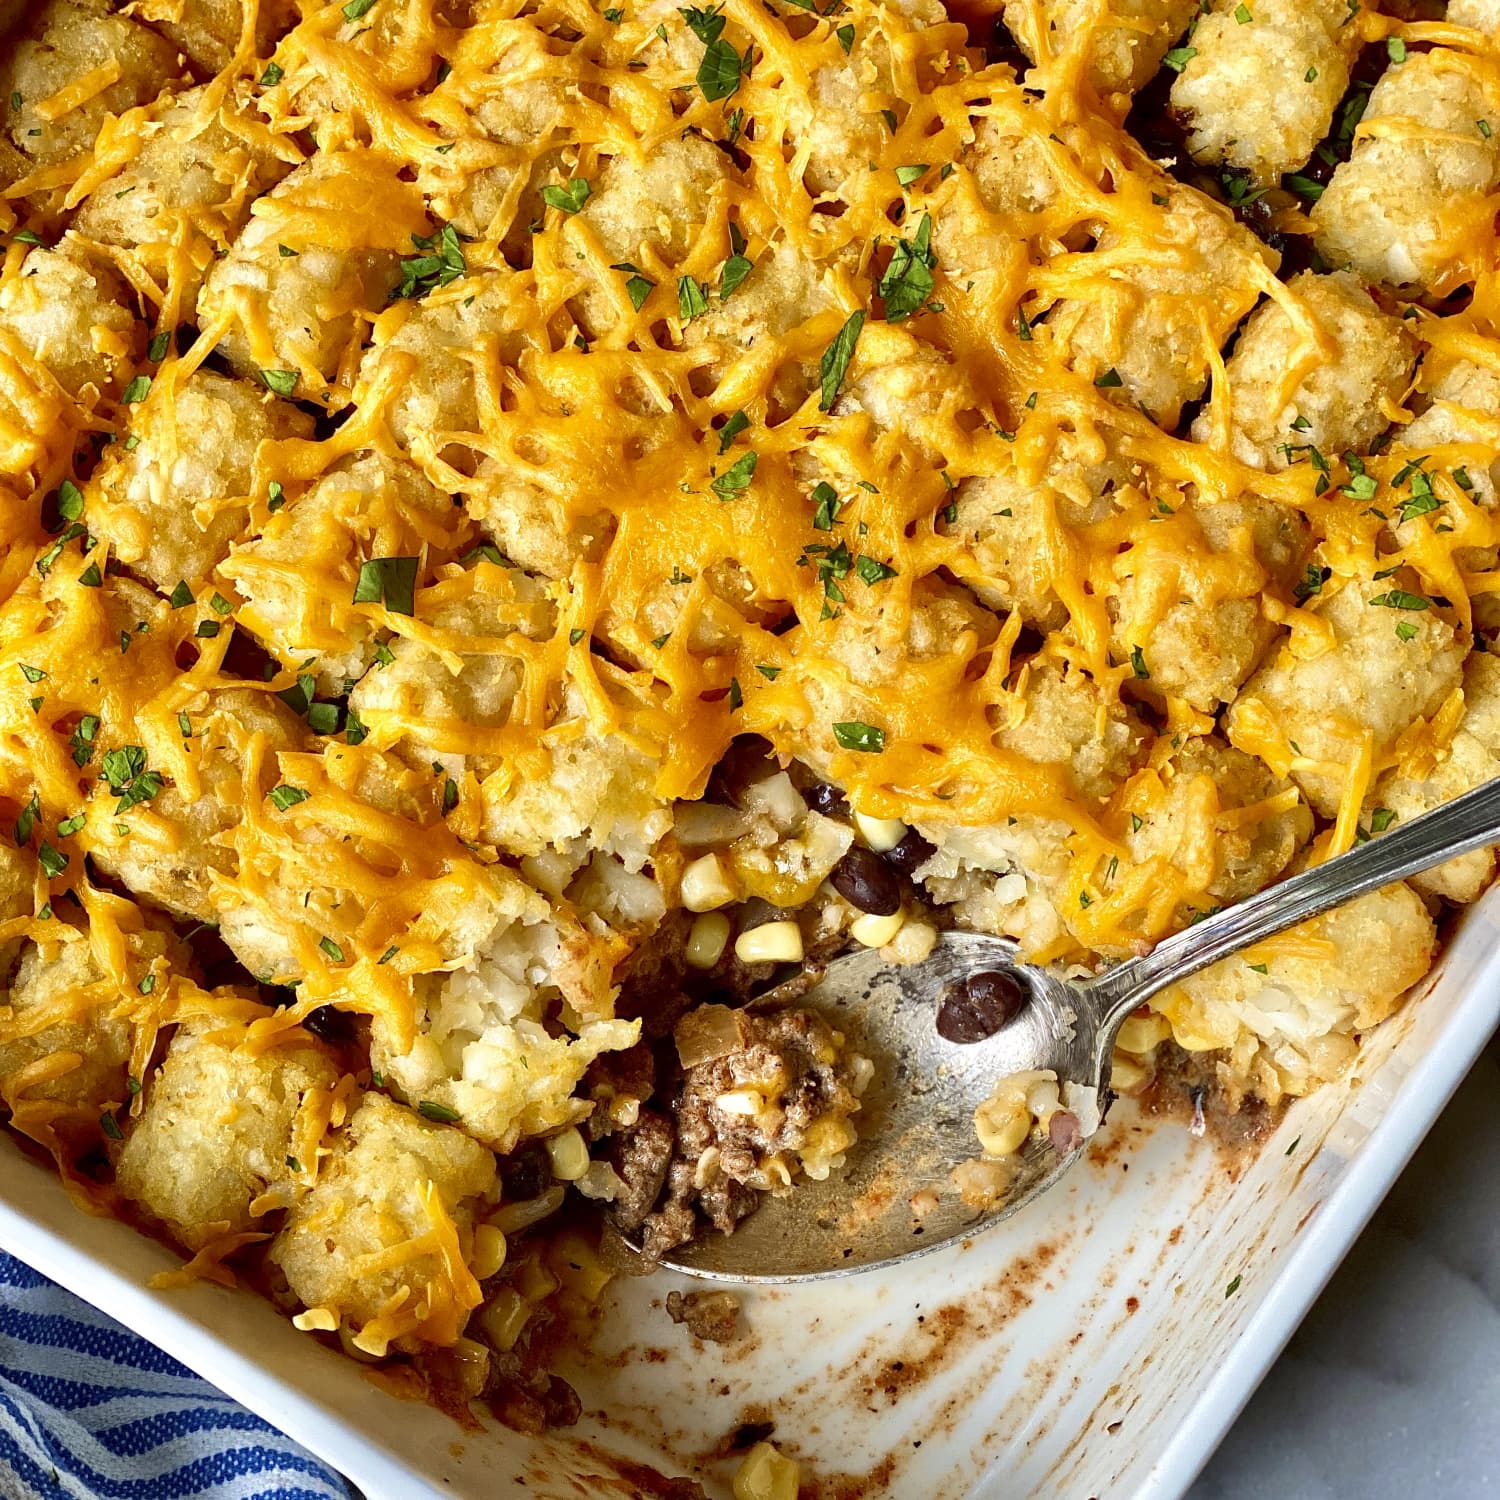 Cowboy Casserole Recipe (with Tater Tots)